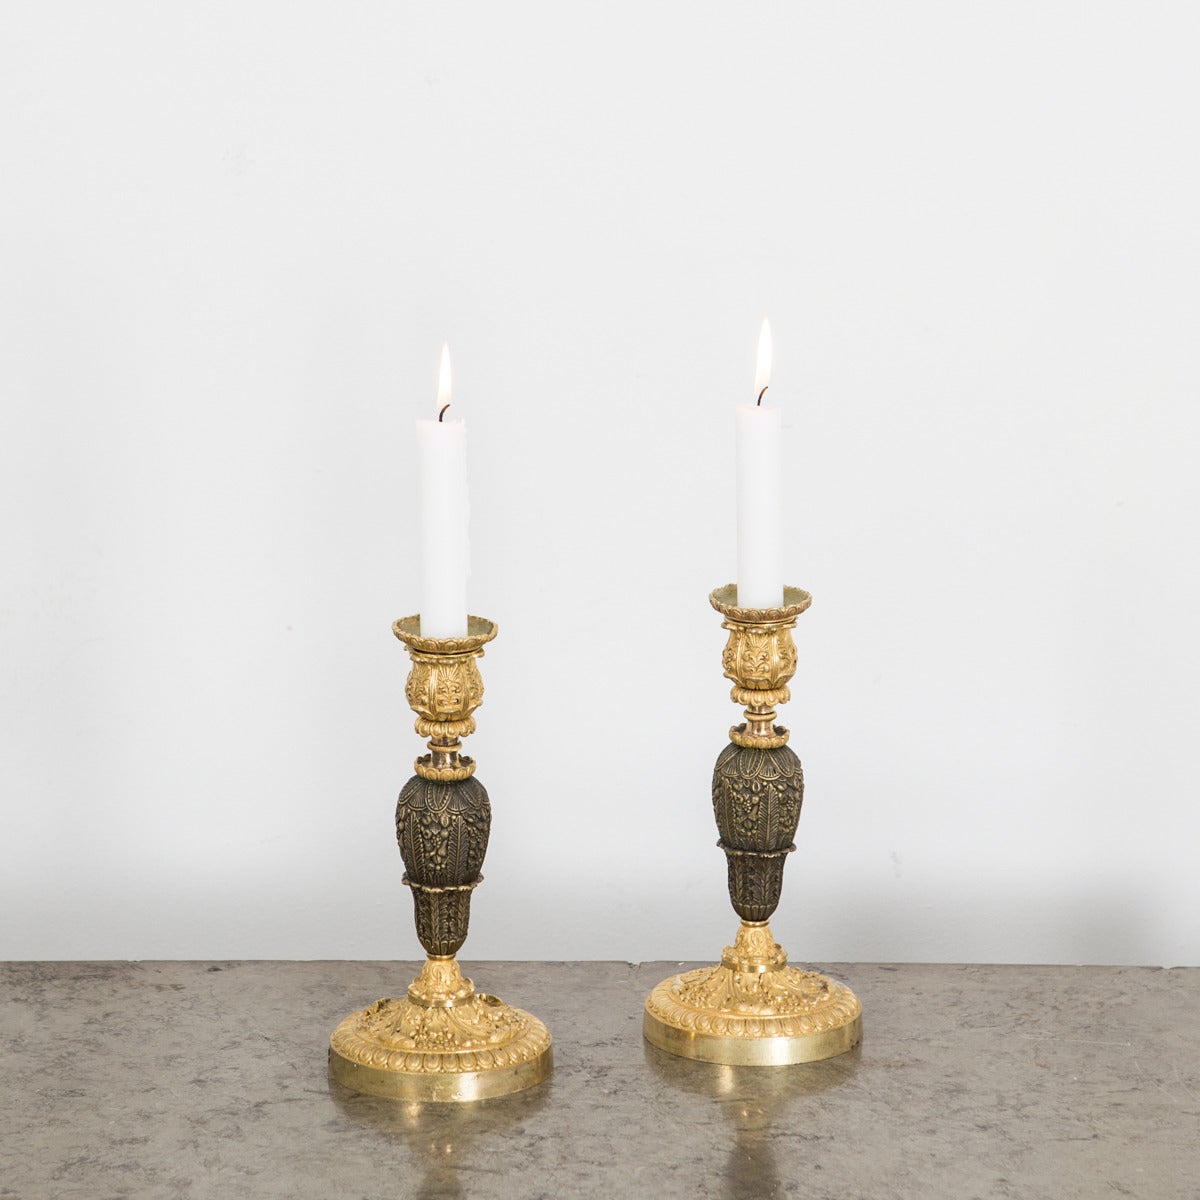 A pair of candlesticks made early 20th Century. Bronze and dark patinated bronze.